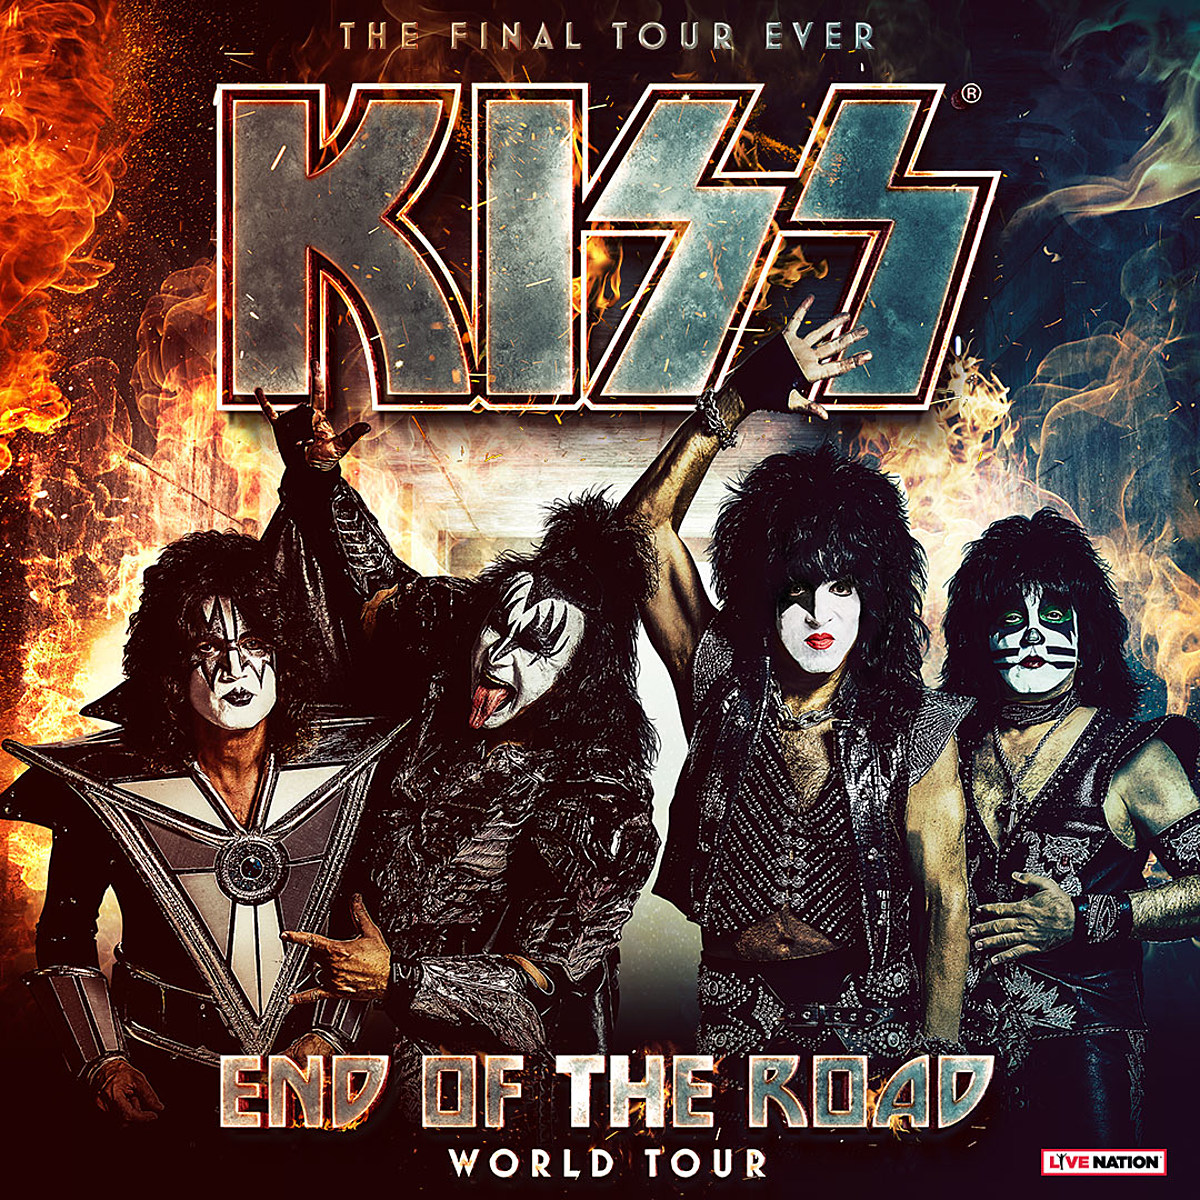 Score A Pair Of Tickets To See Last KISS Concert With A Photo